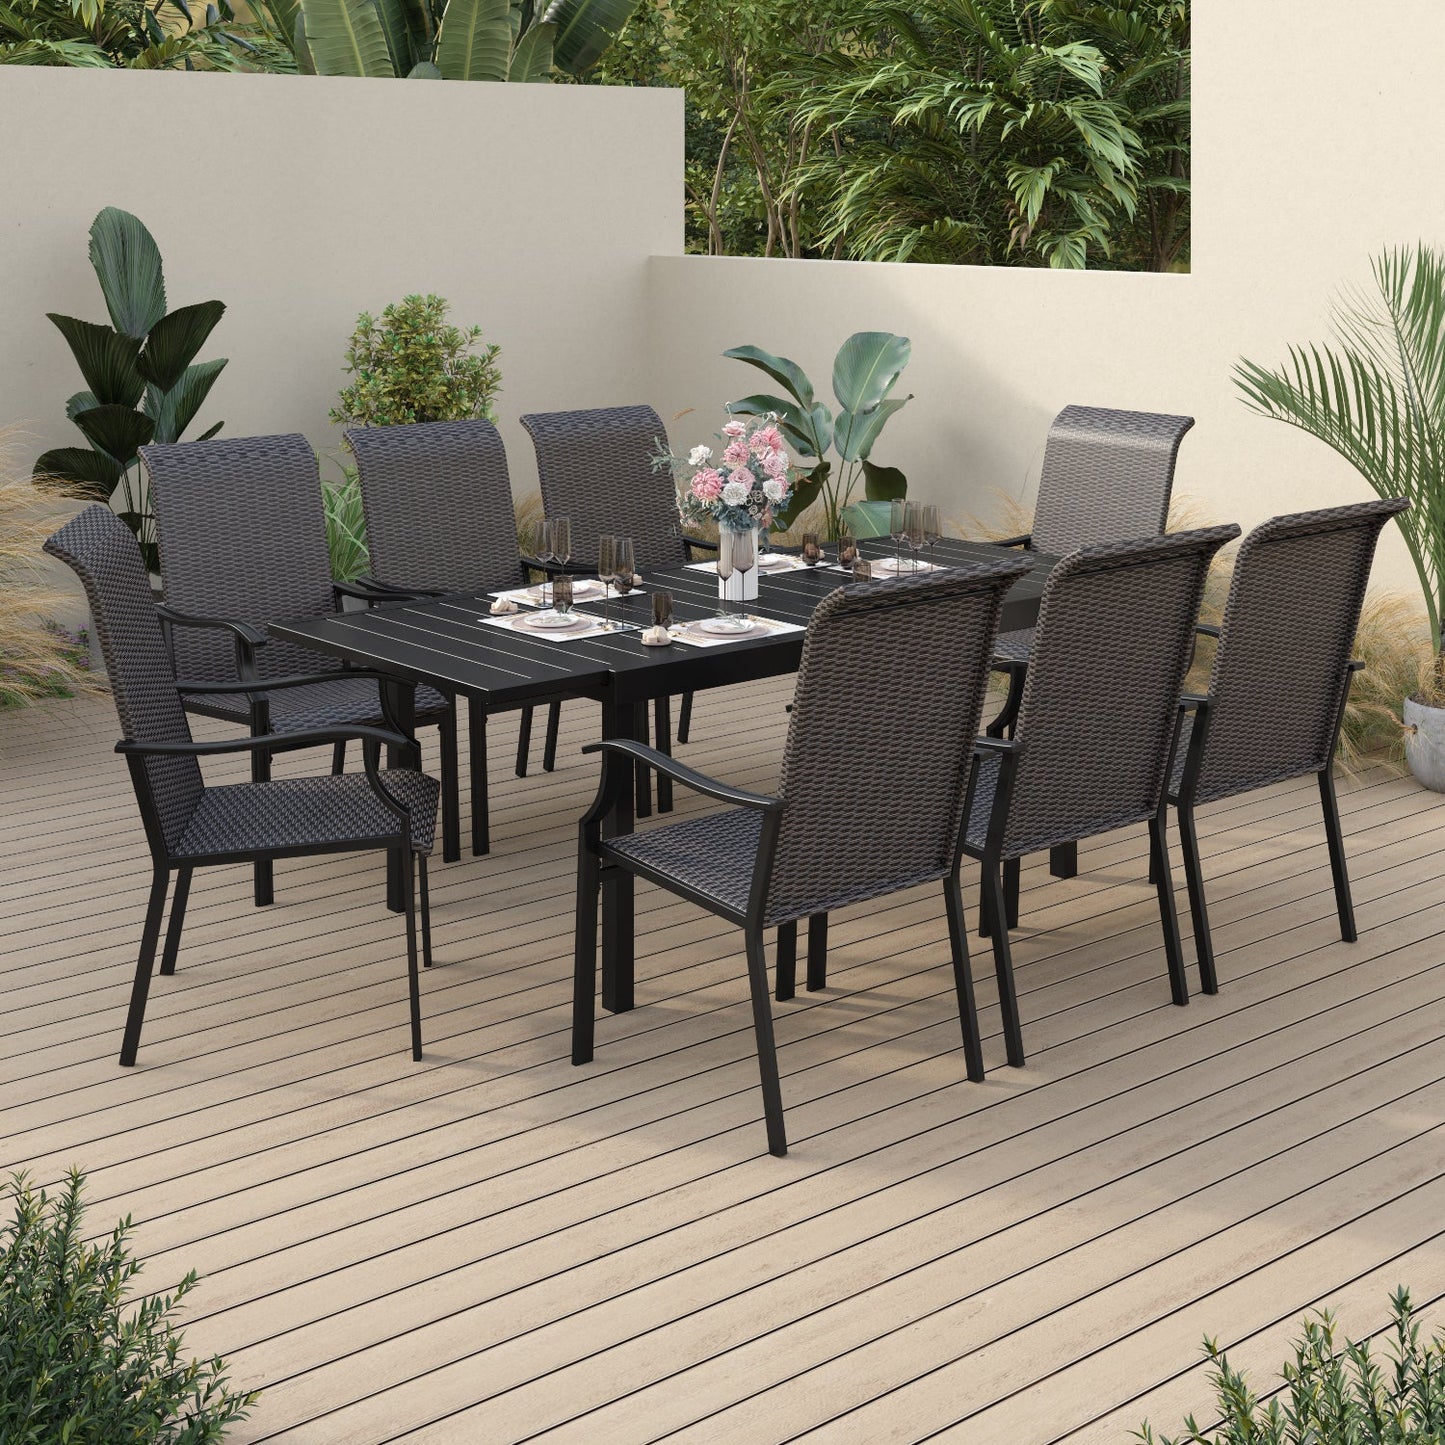 Sophia & William 9 Pieces Outdoor Patio Dining Set High Back Dining Chairs and Metal Dining Table with Umbrella Hole